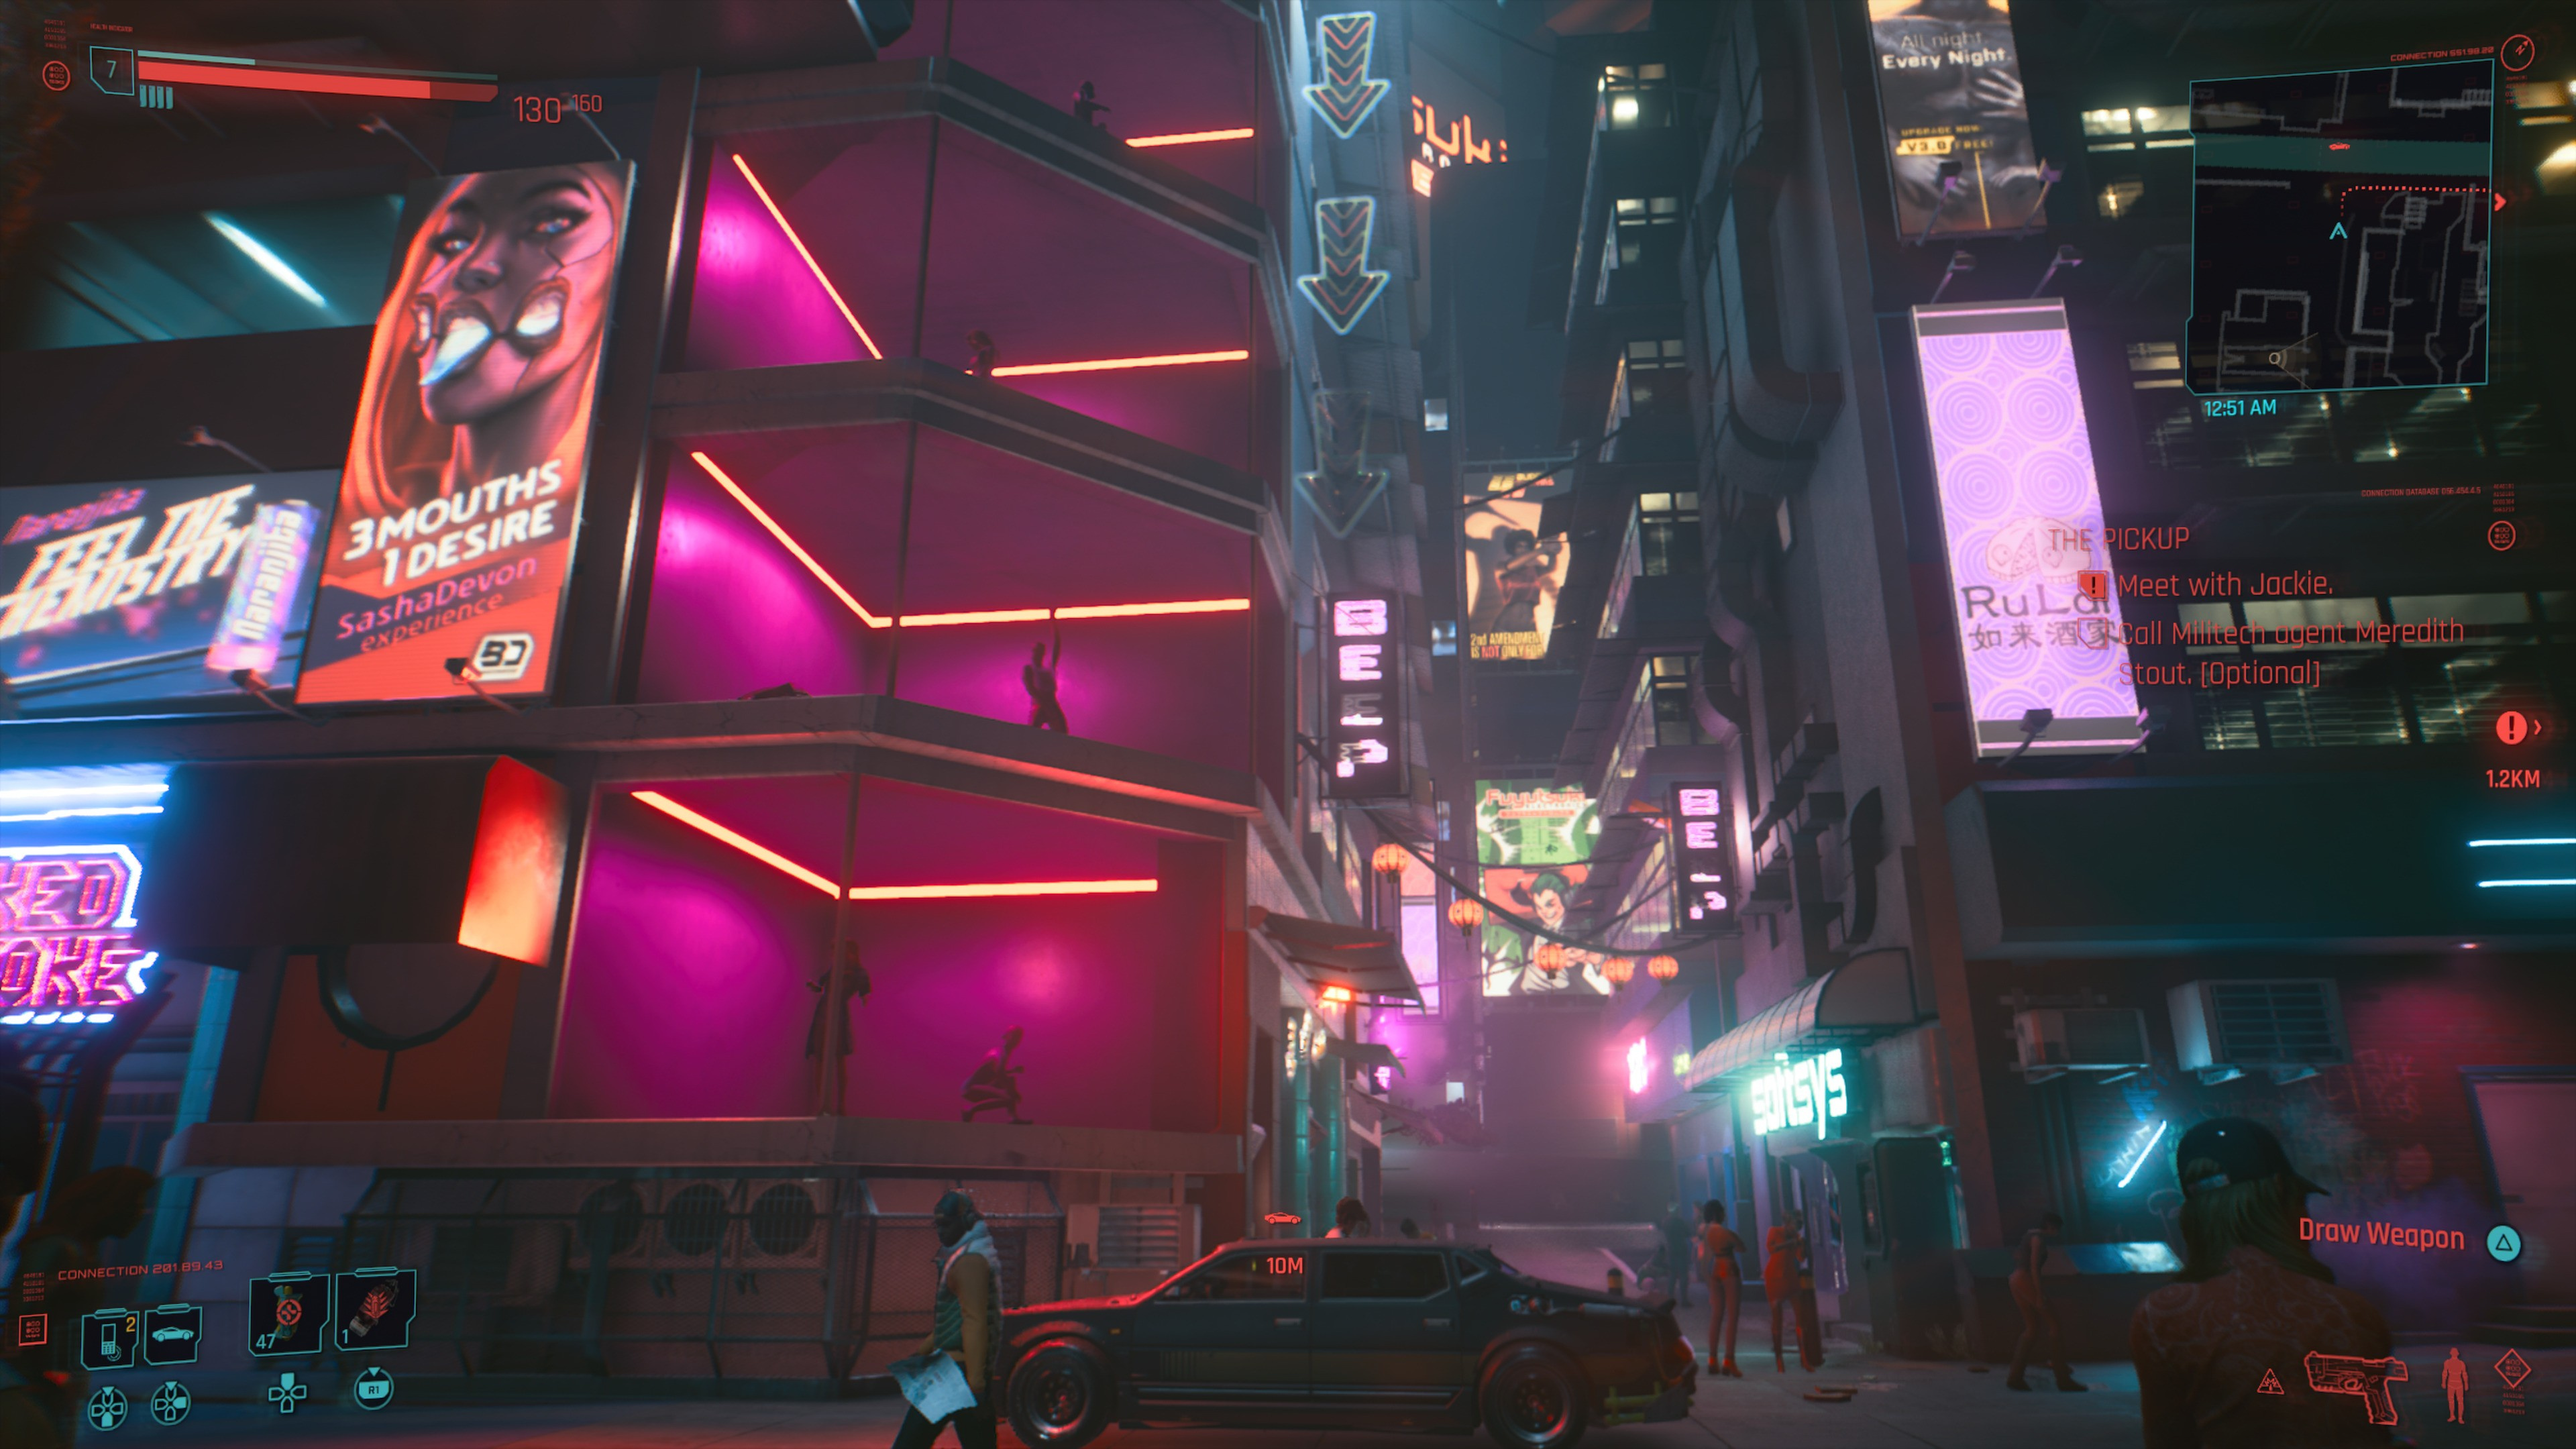 How Cyberpunk 2077 Runs on PS4 Pro, and PS4